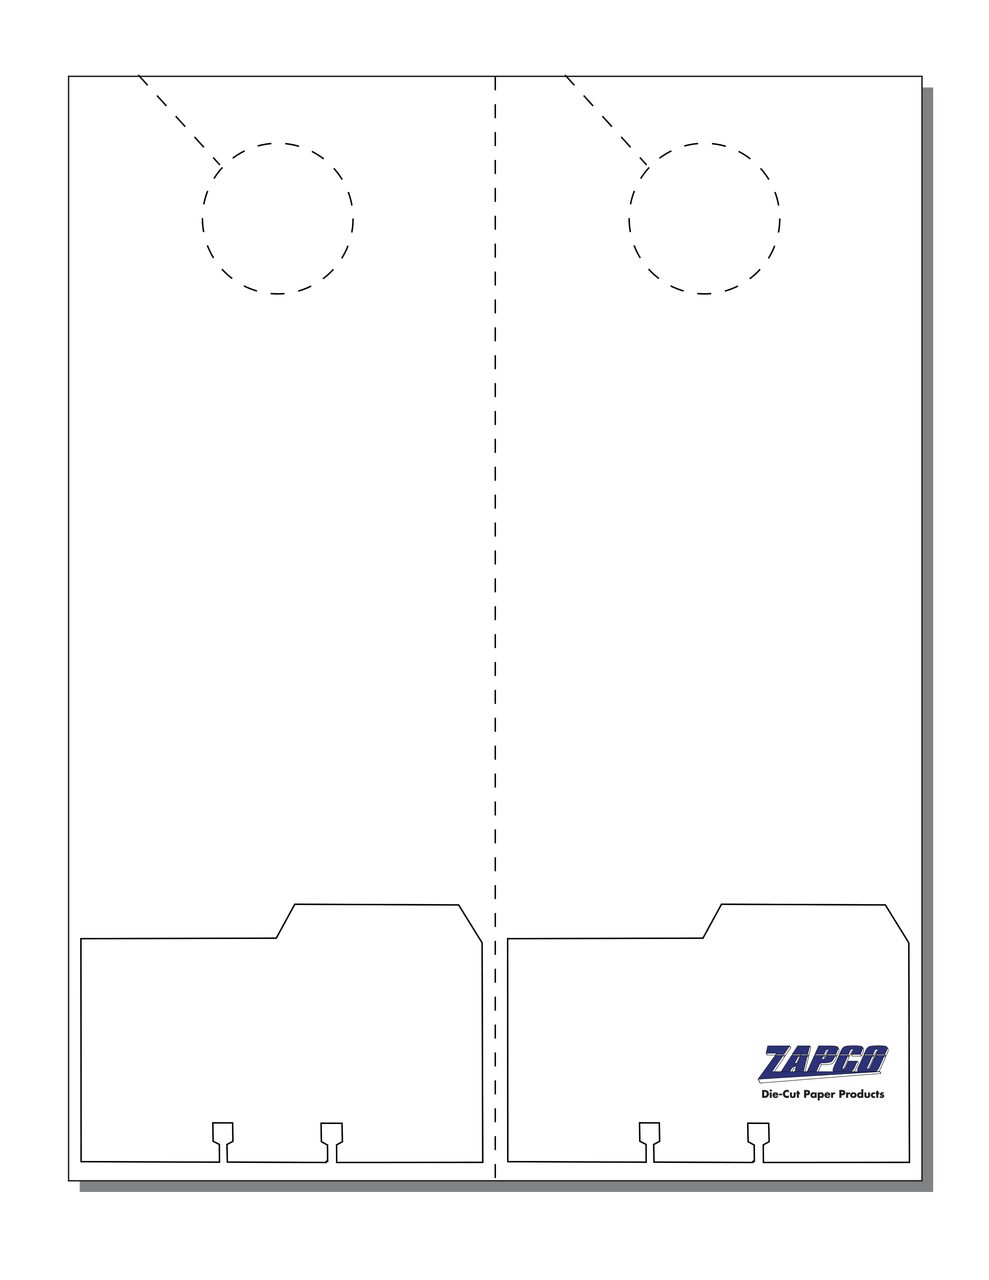 Item 227: 2-Up 4 1/4" x 11" Door Hanger with Rotary File Card 8 1/2" x 11" Sheet(250 Sheets)